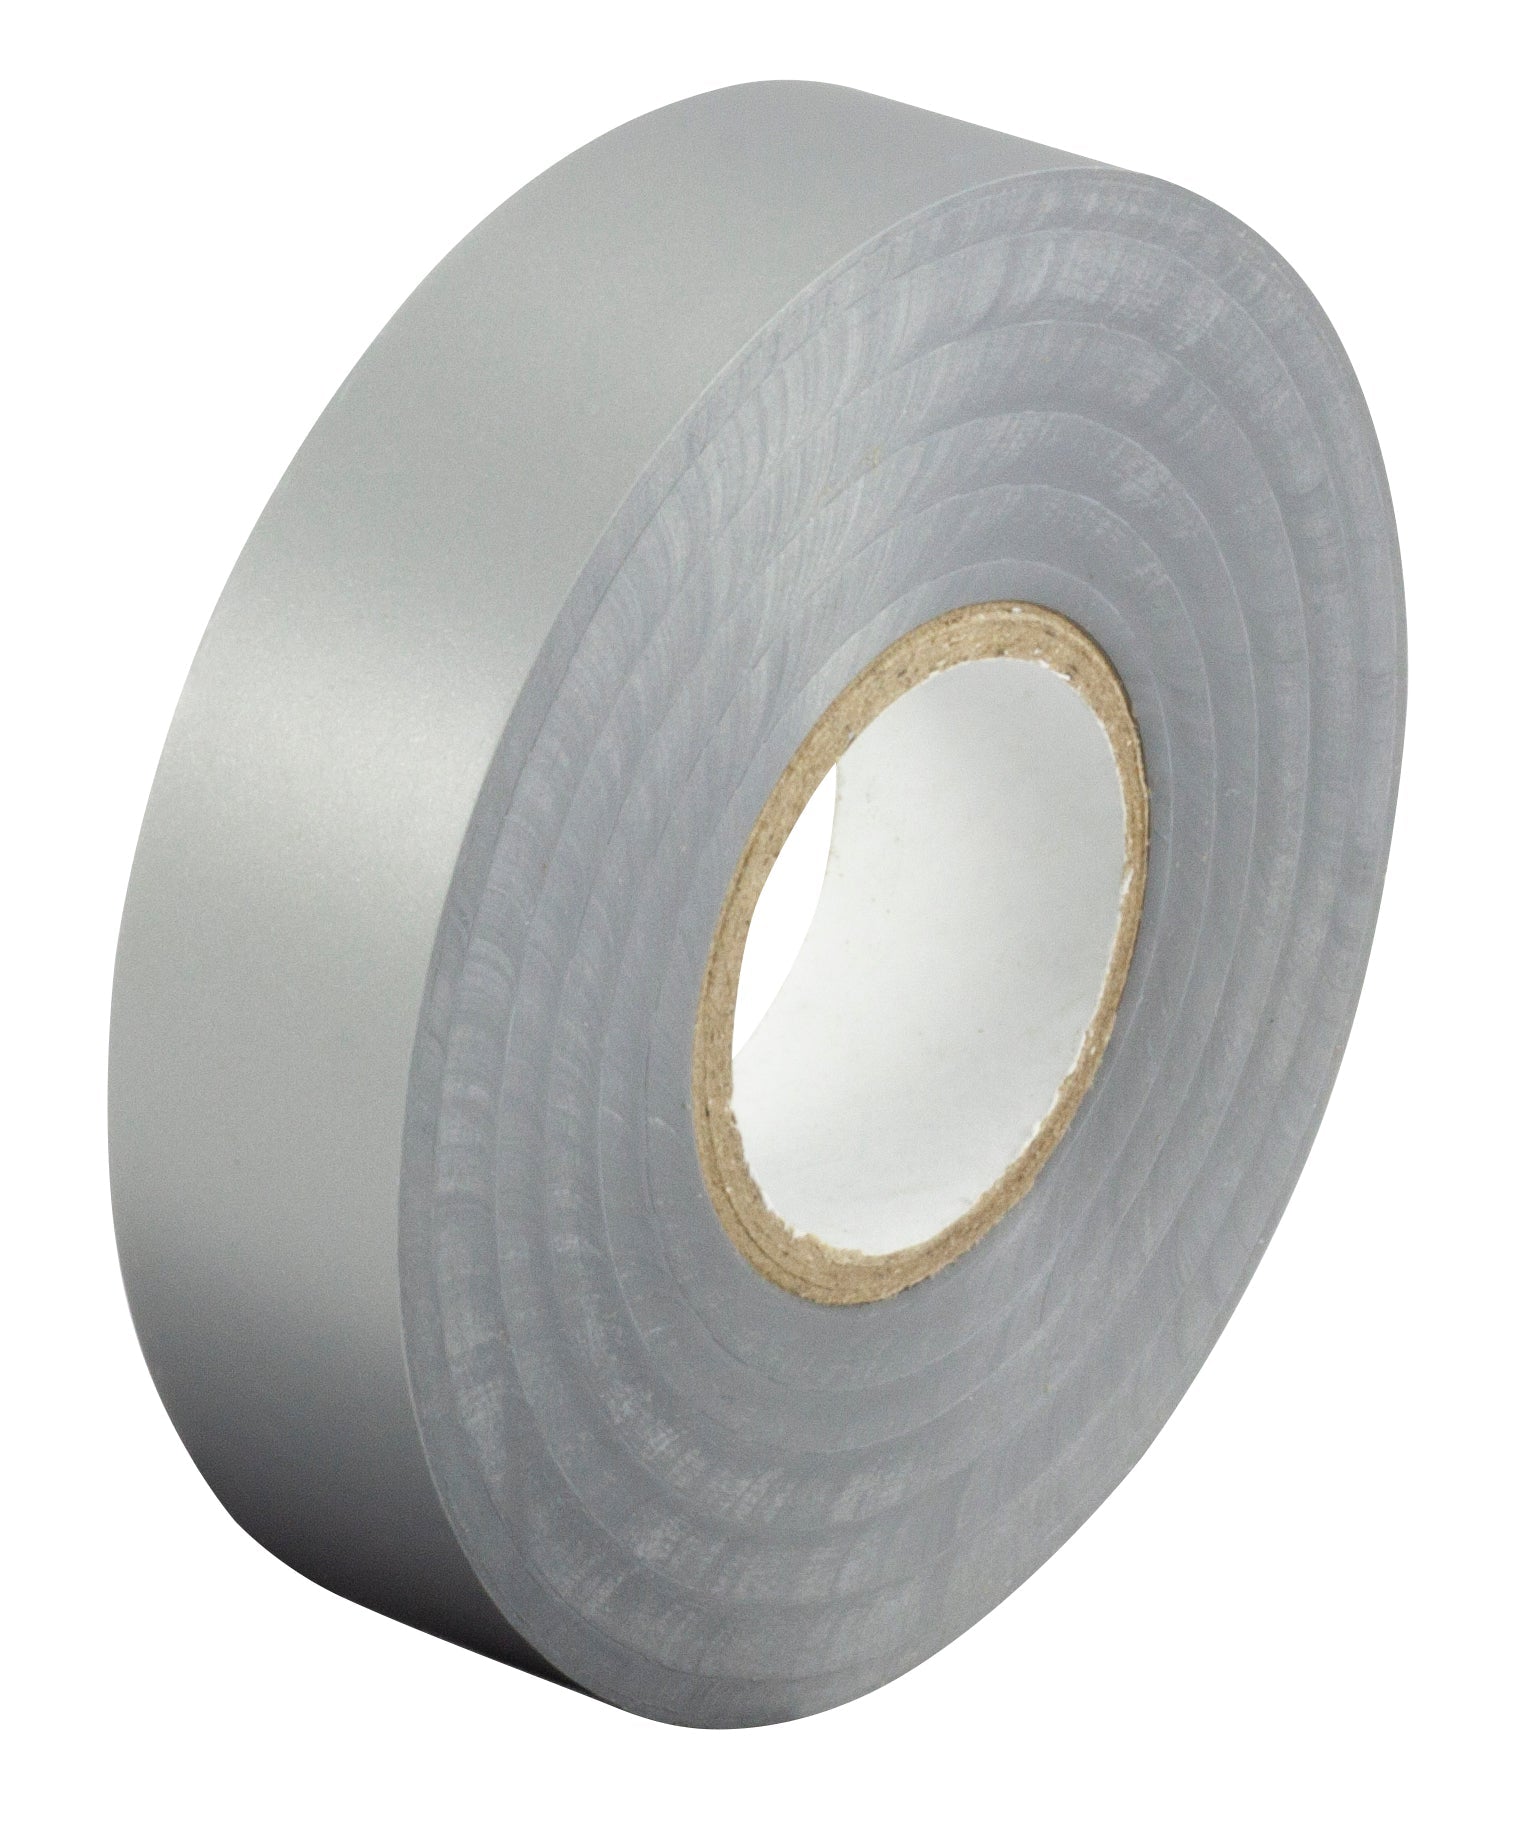 PVC Tape Size: 19mmx33m Roll - Grey - Pack of 10